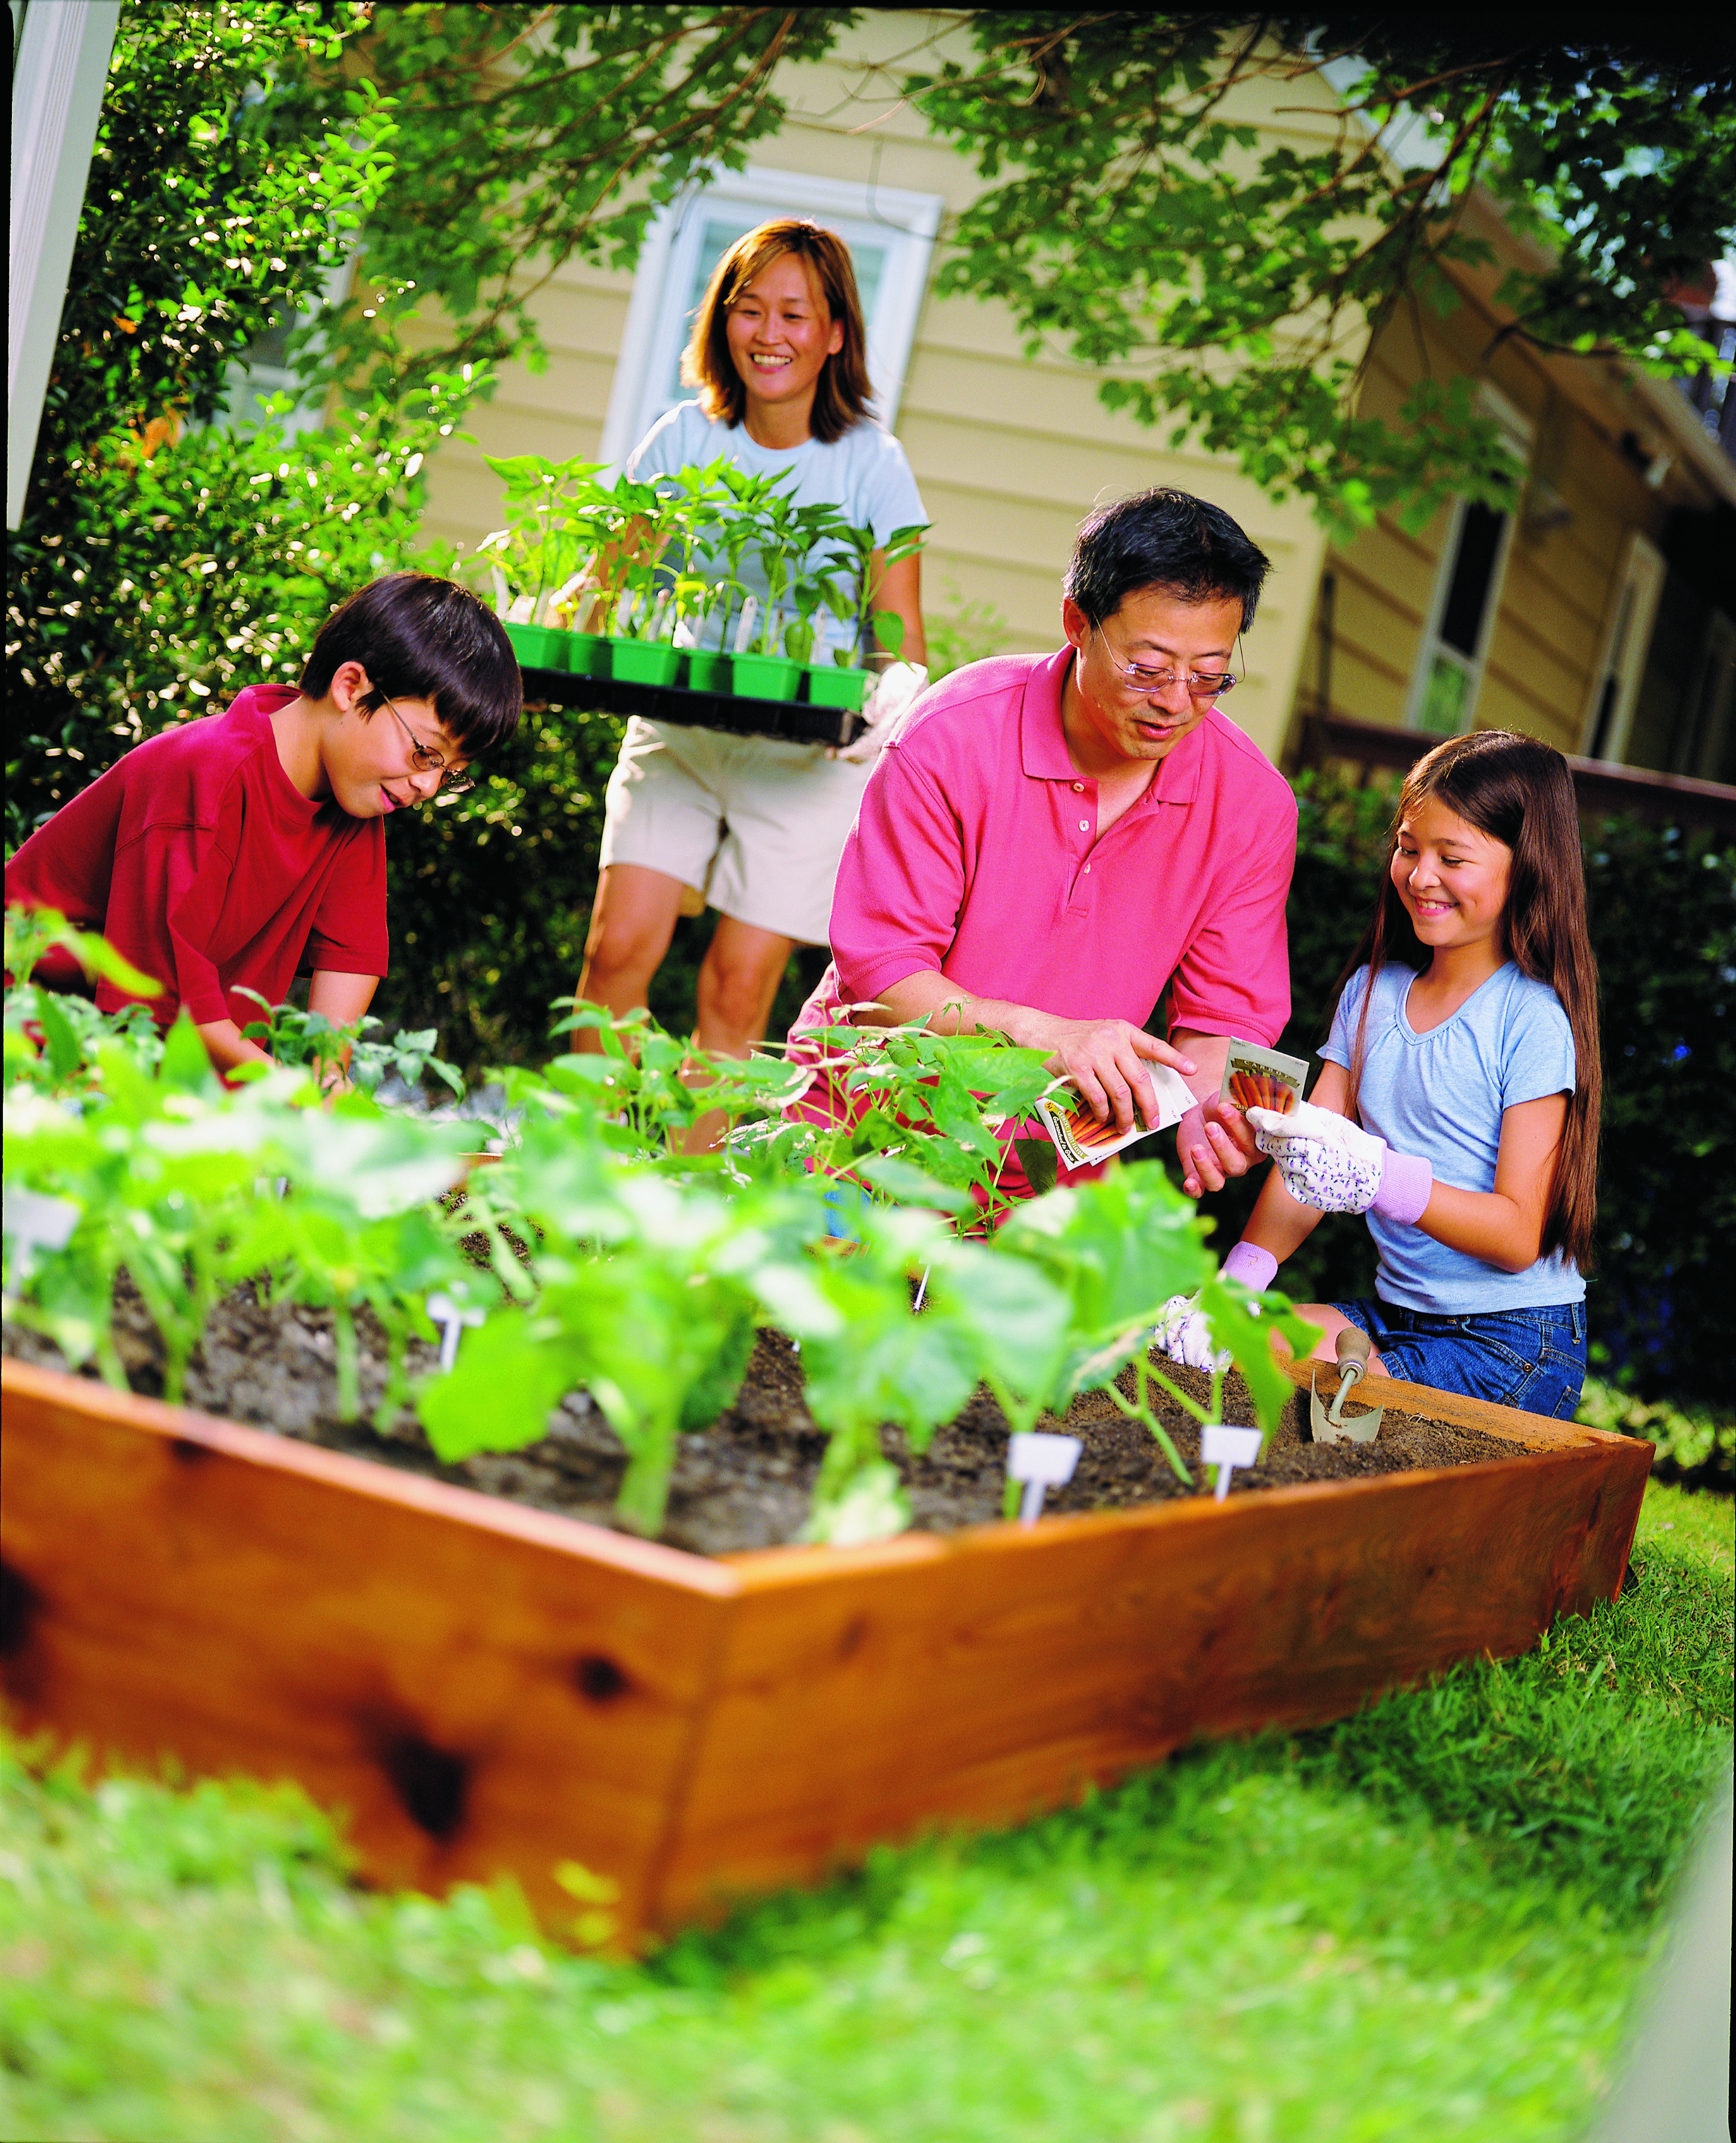 Continue the benefits of vegetable gardening into the fall